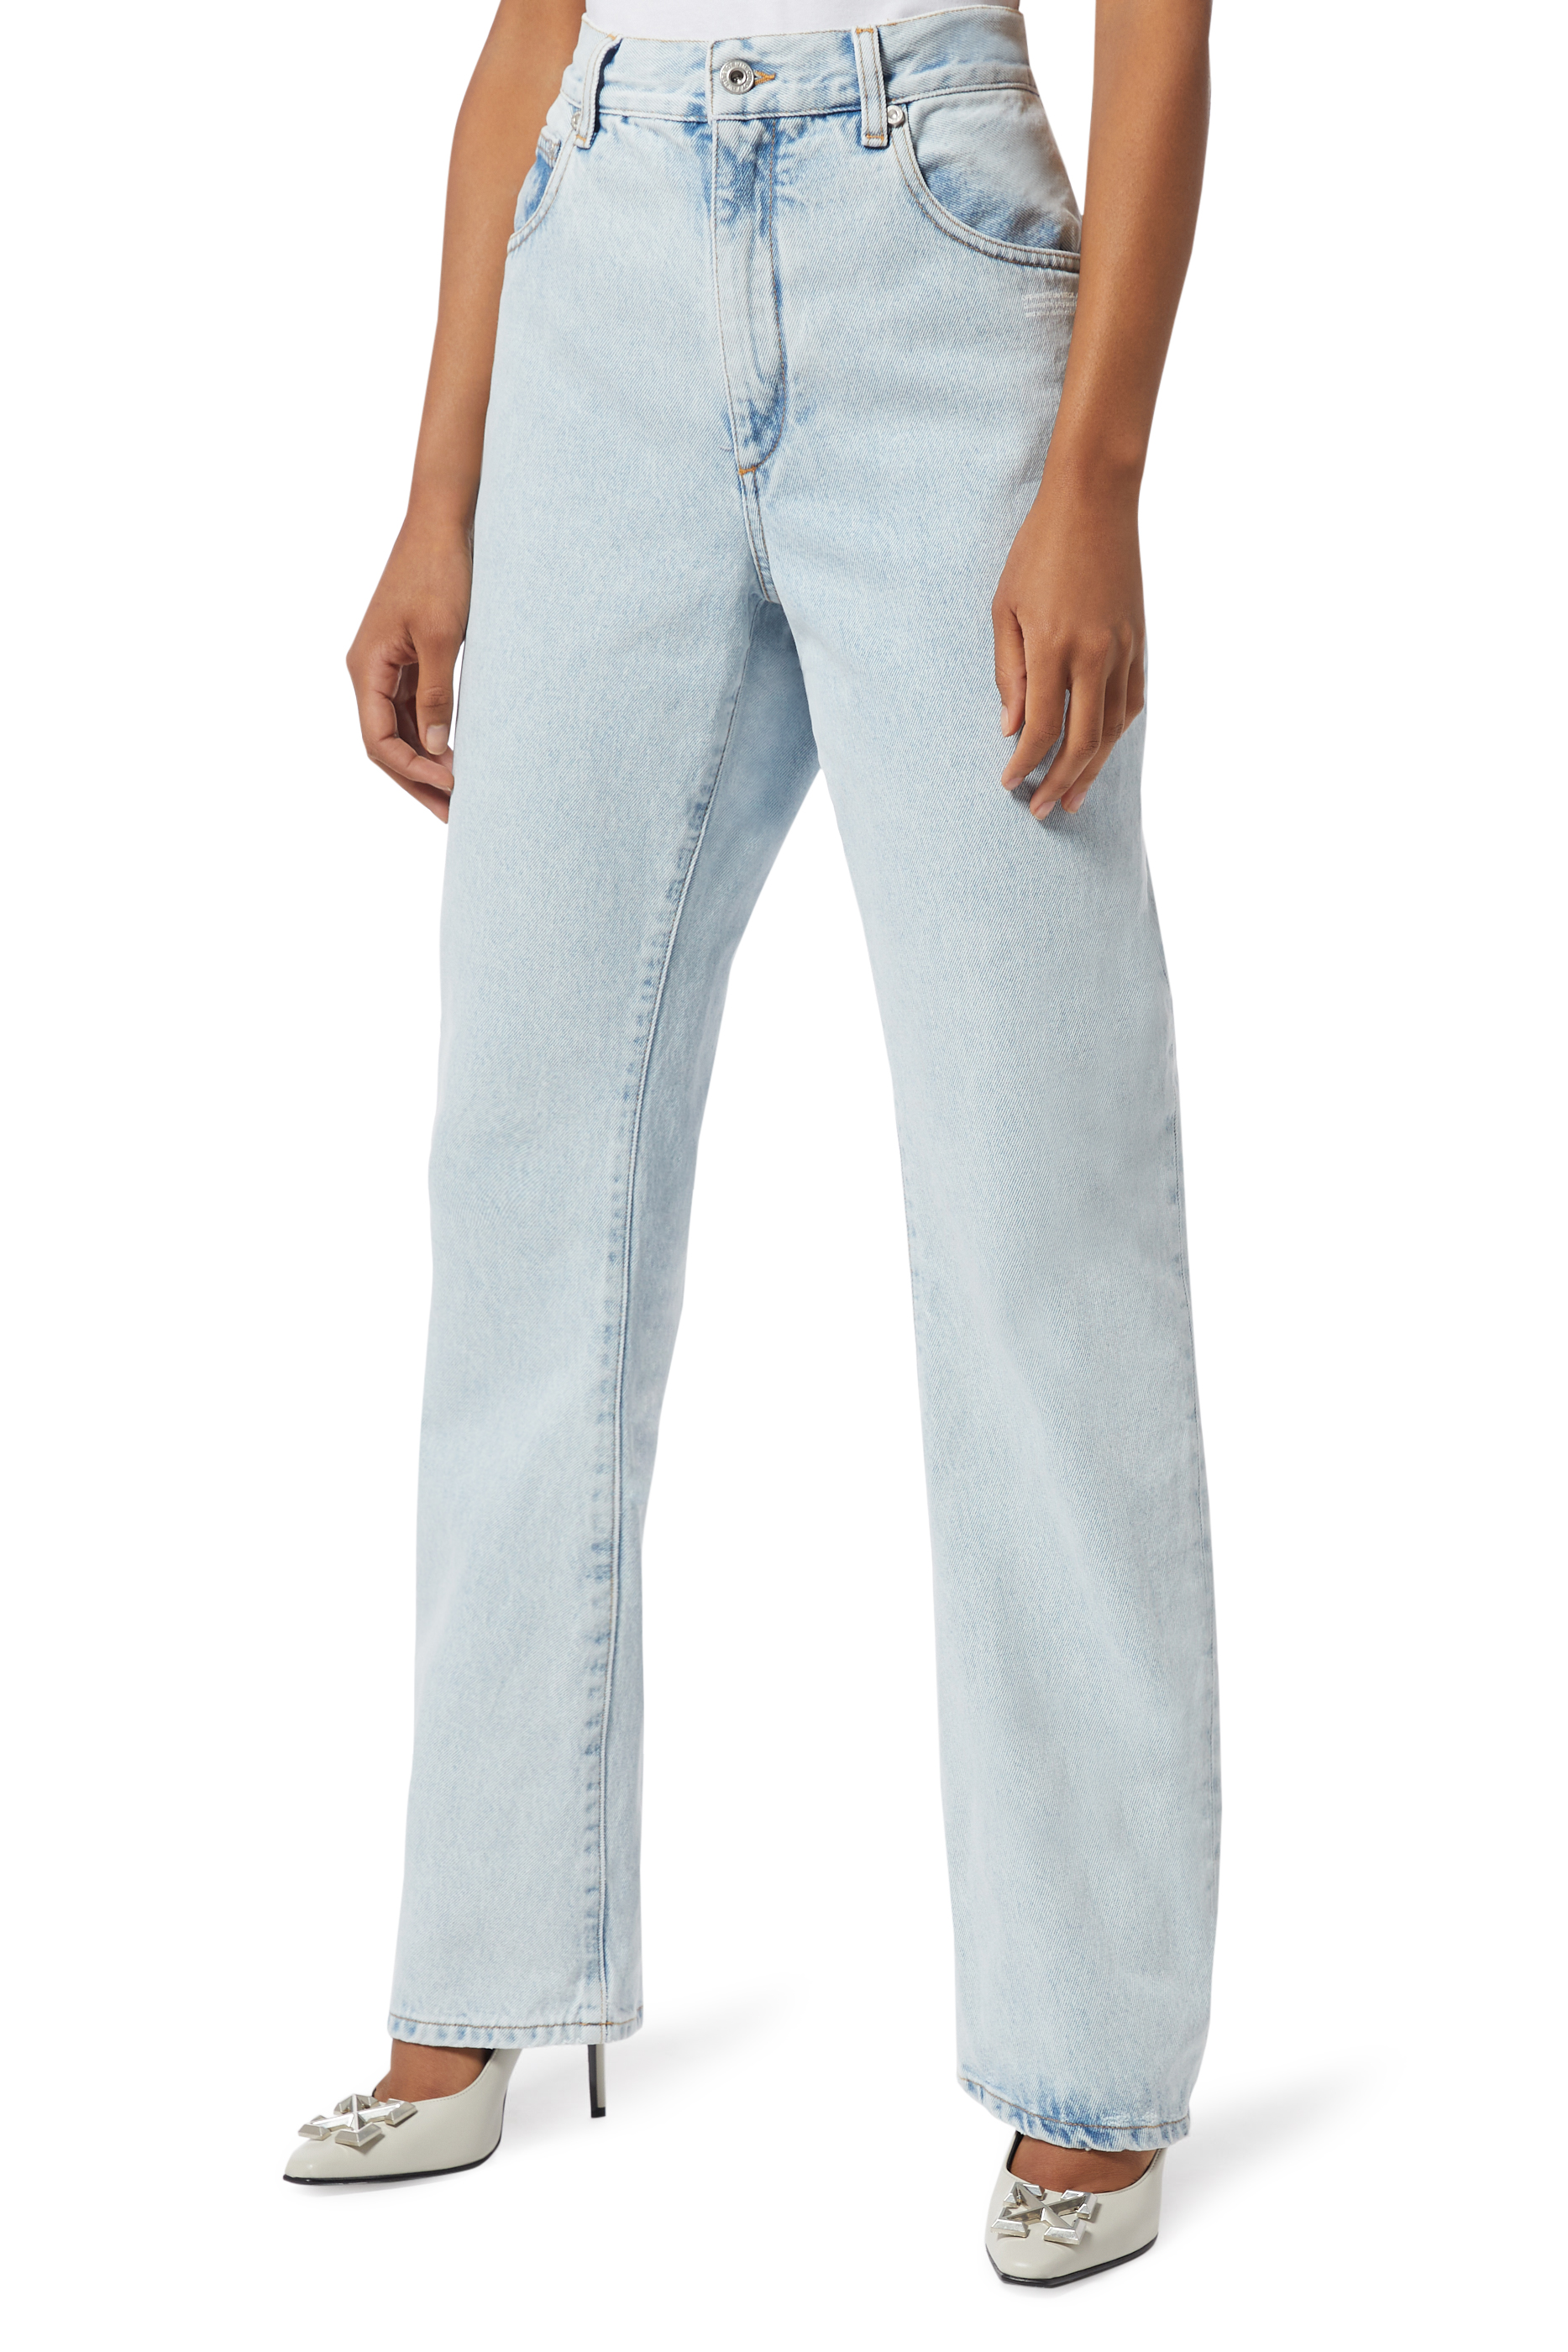 Buy Light Blue Off White Bleach Baggy Jeans - for AED 2025.00 Jeans ...